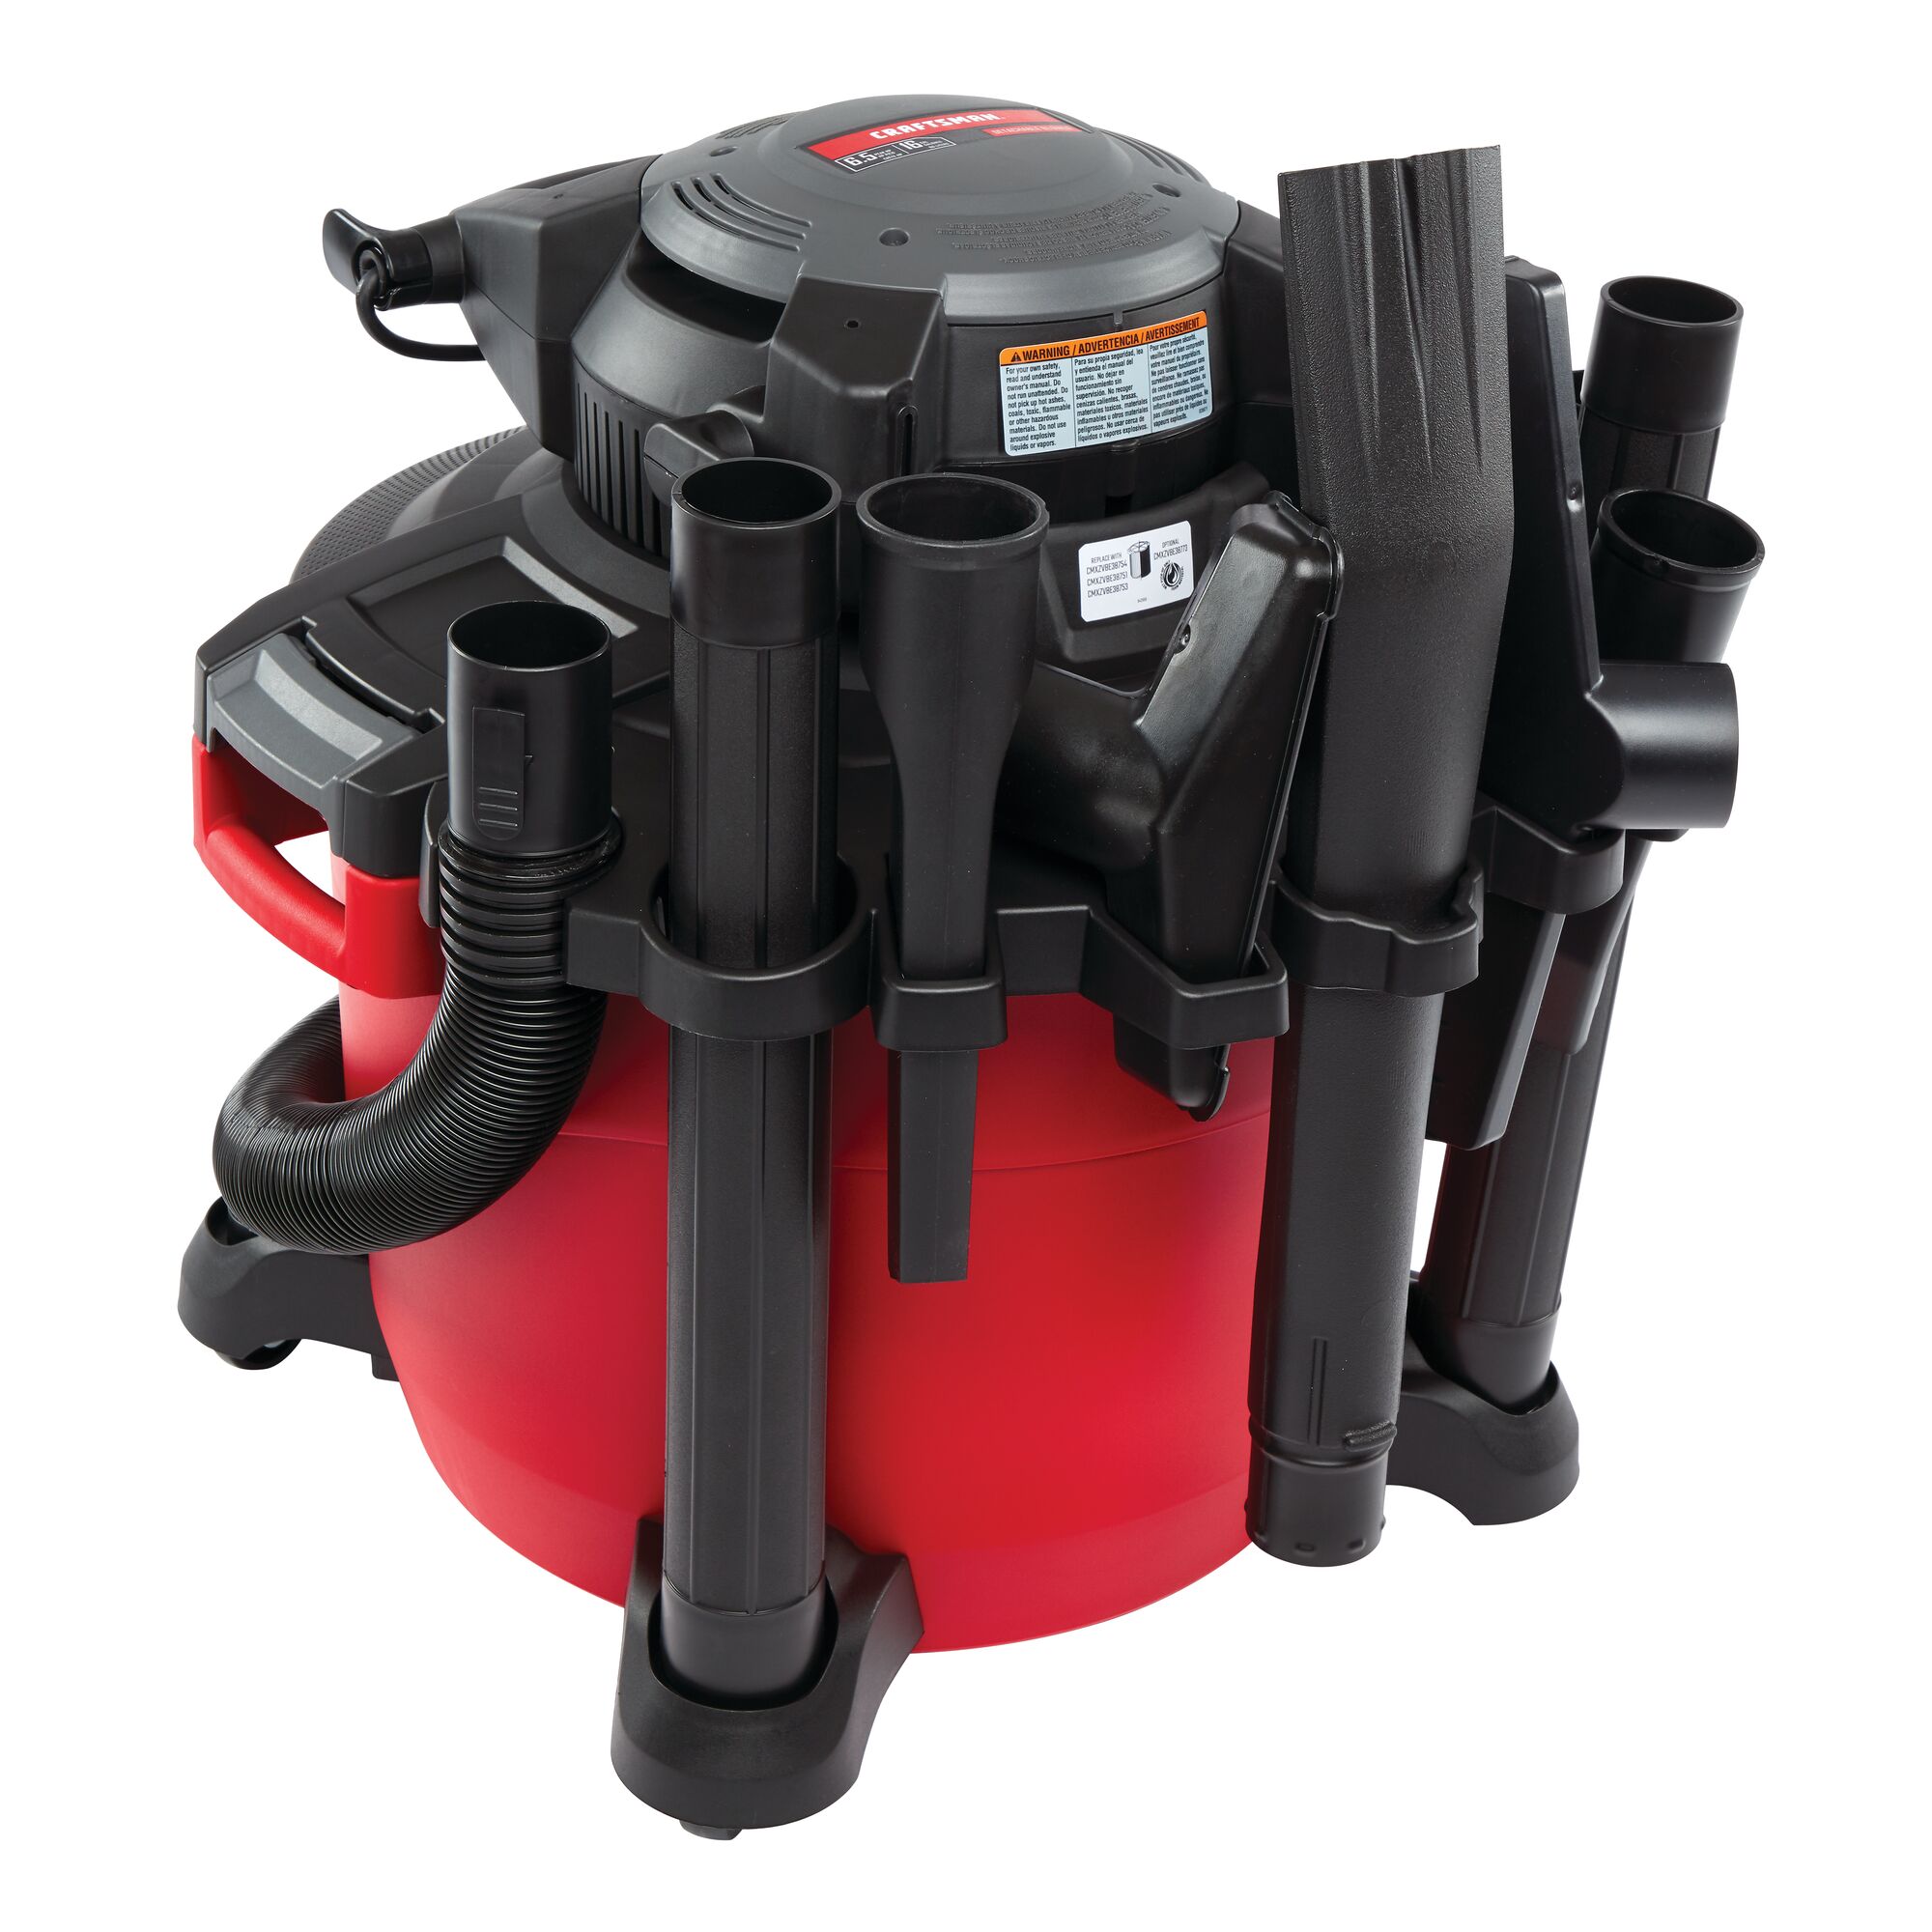 View of CRAFTSMAN Vacuums: Wet/Dry Shop Vac highlighting product features